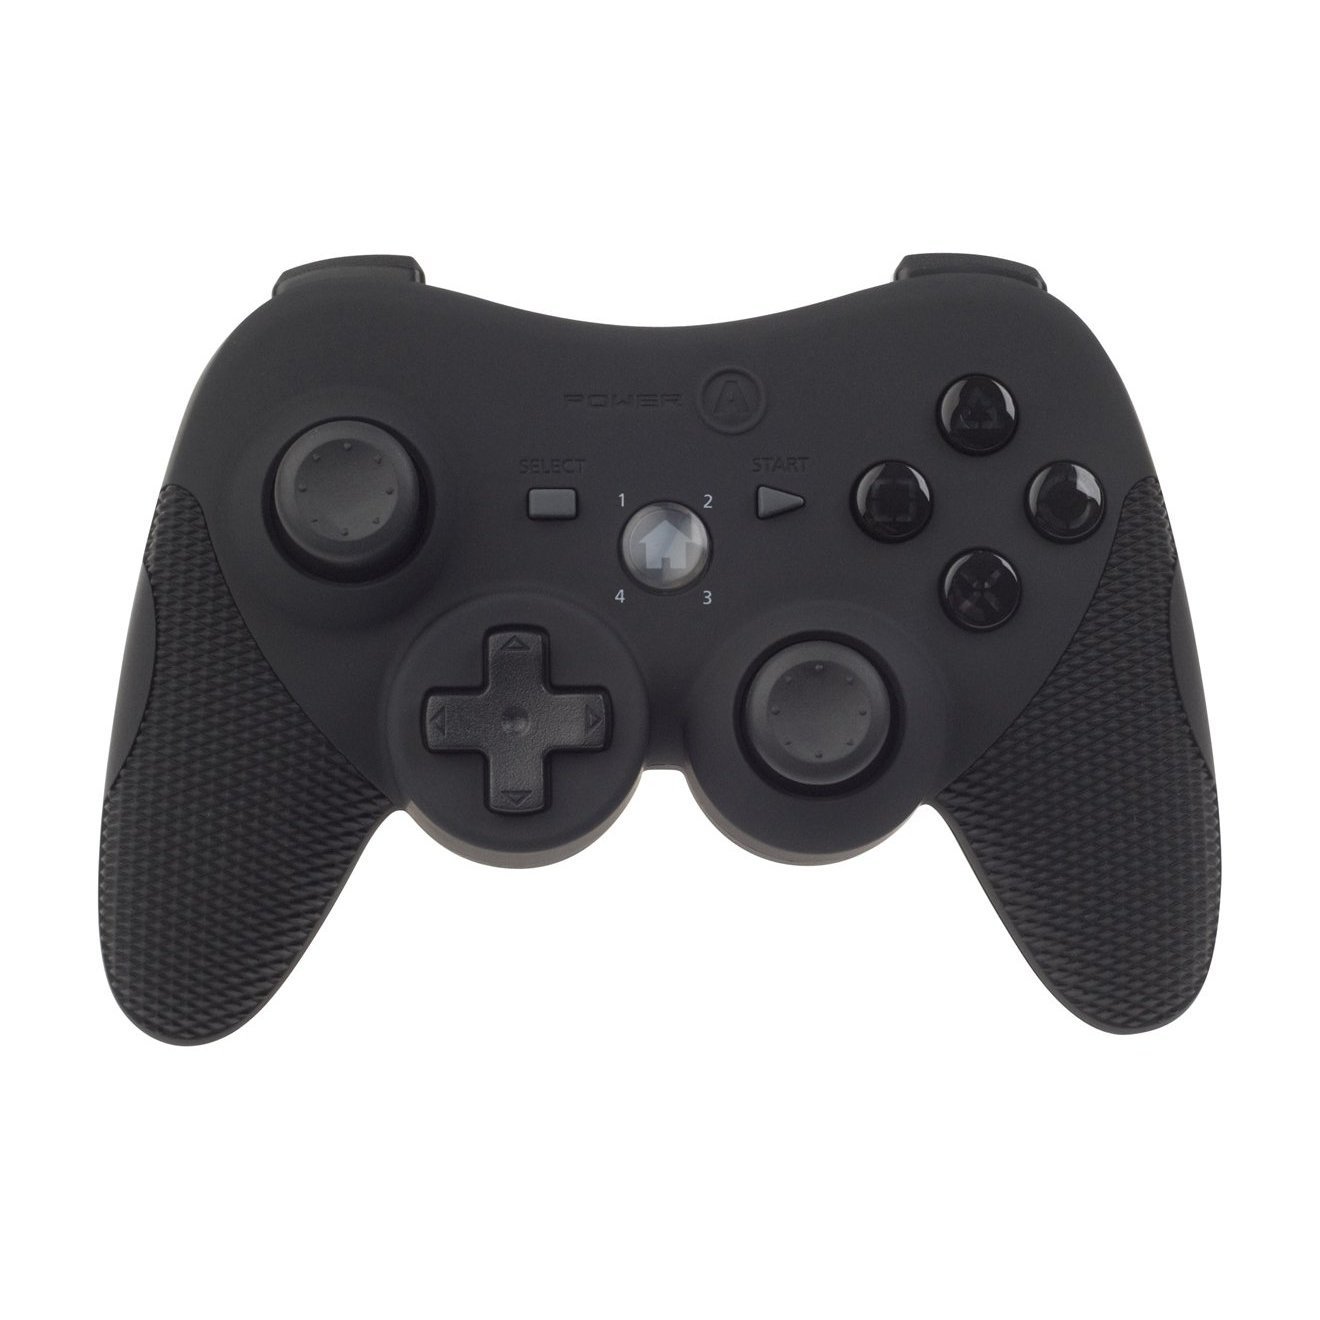 3rd Party Wireless Controller